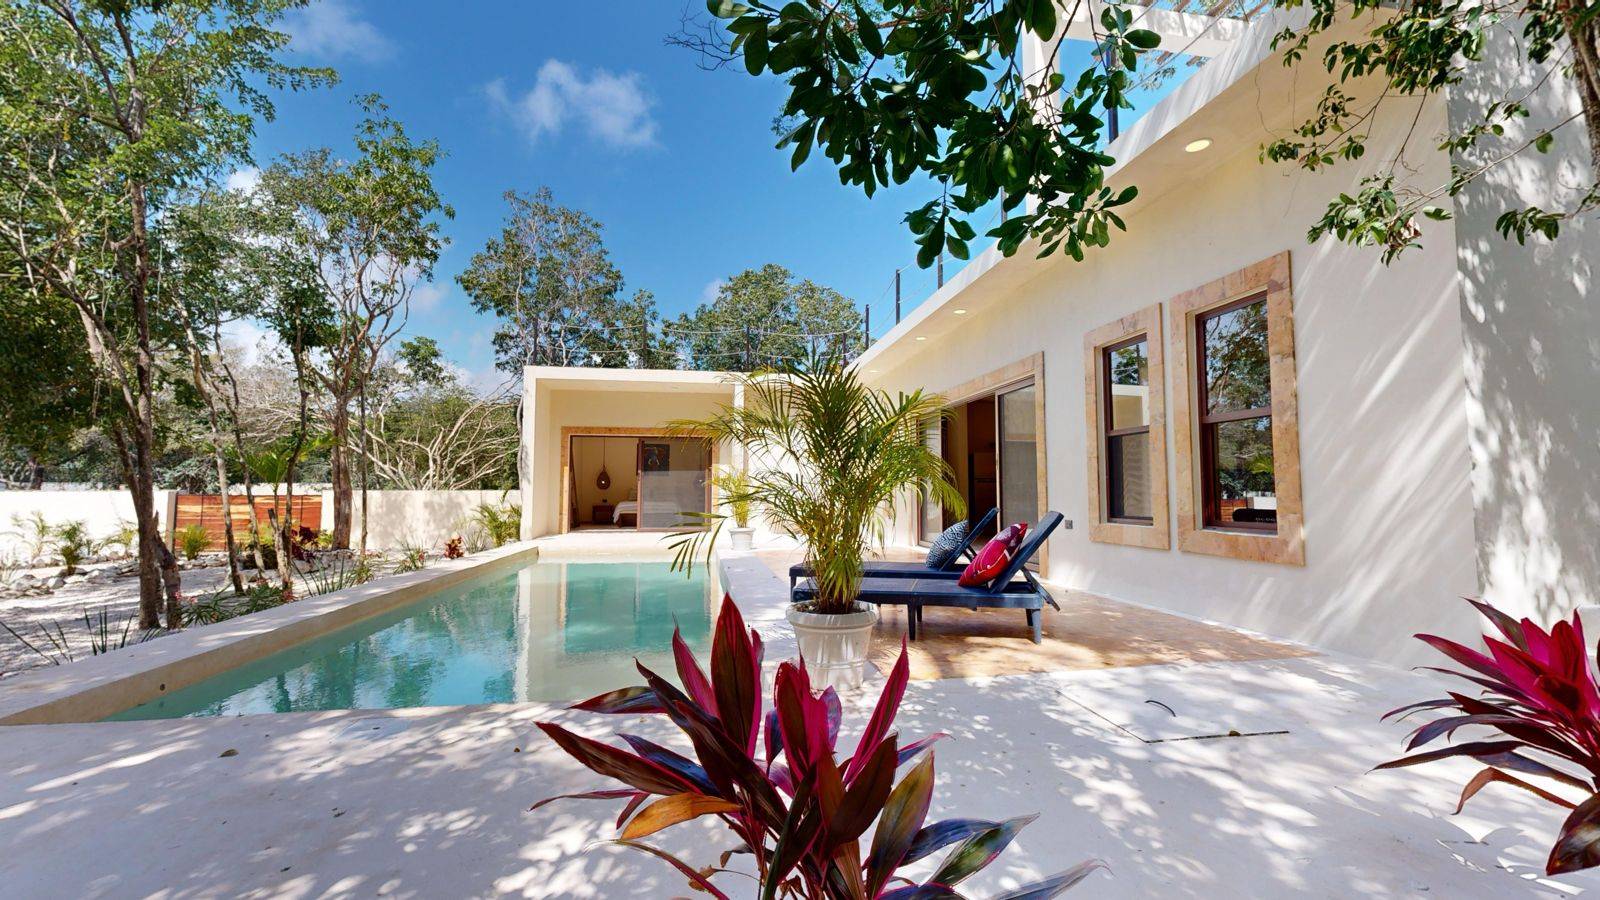 Villa Terra: A Luxurious Oasis of Serenity with Private Pool